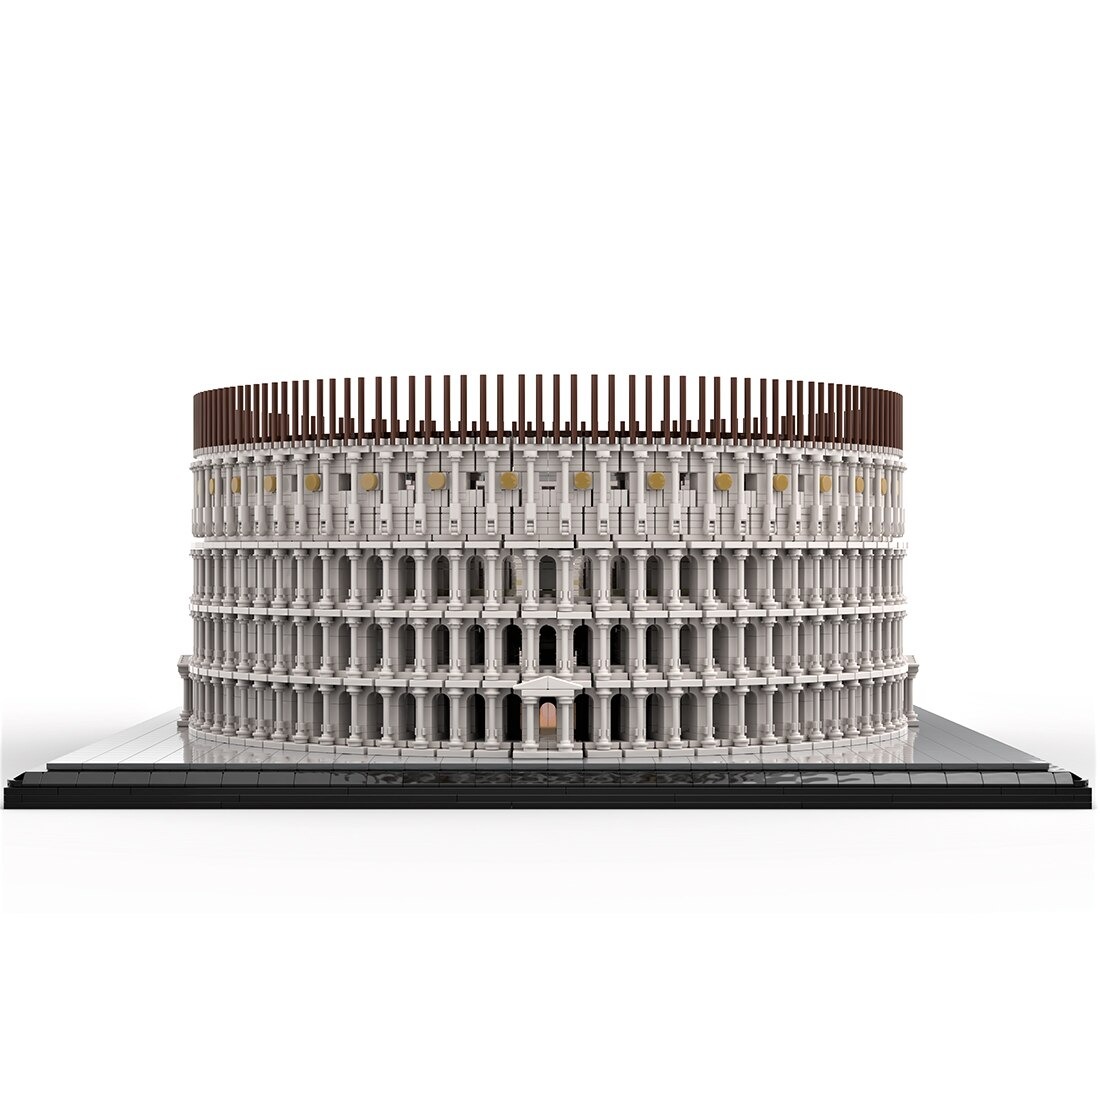 The Real Colosseum MOC-58811 Modular Buildings With 11371 Pieces